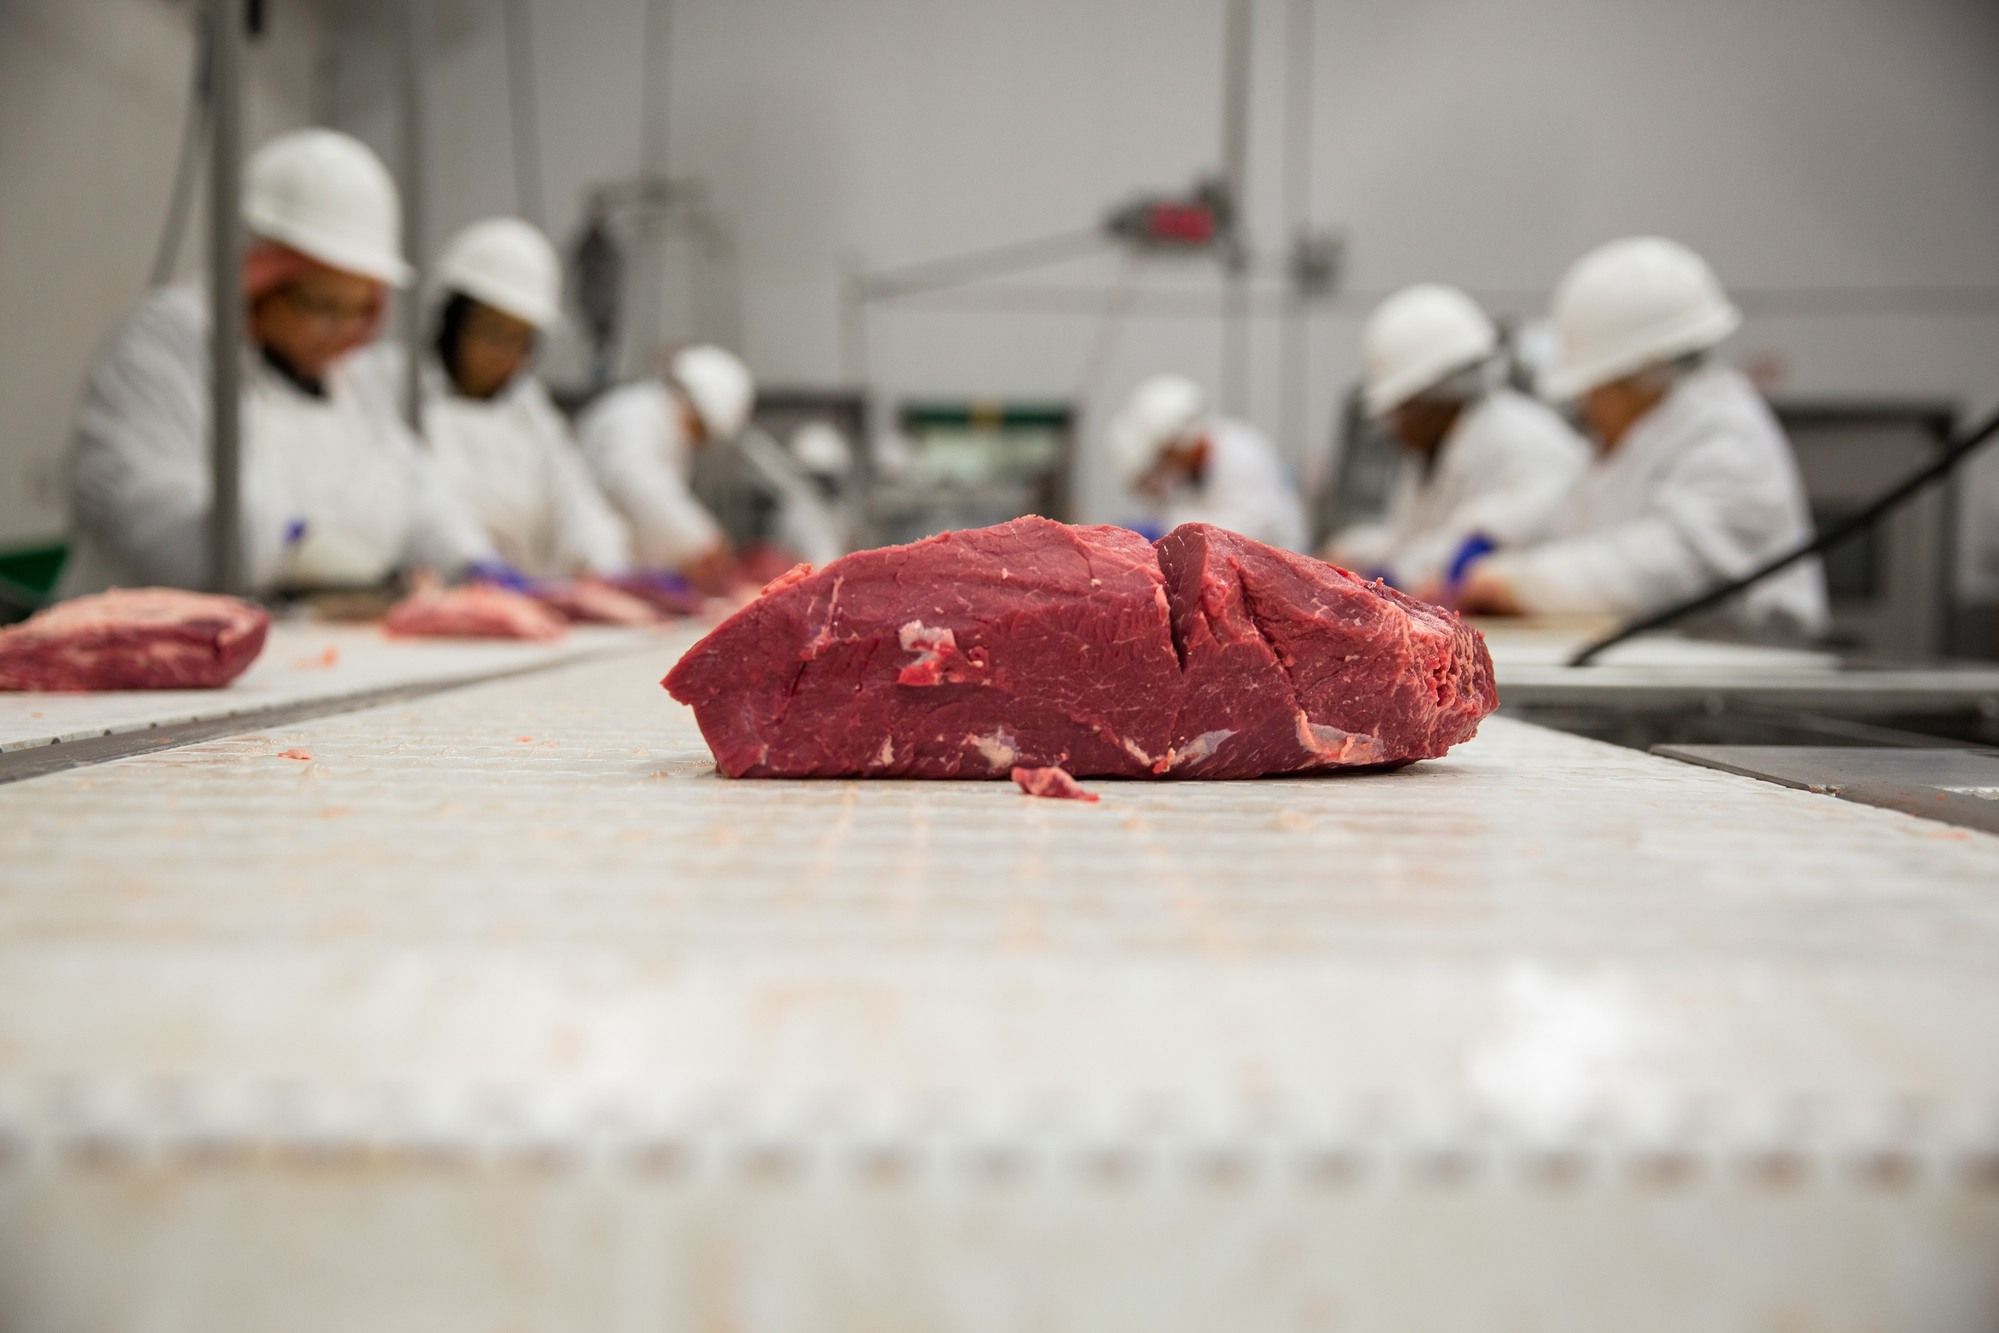 Cargill meat-packing plant reagrading the RCMP investigation 